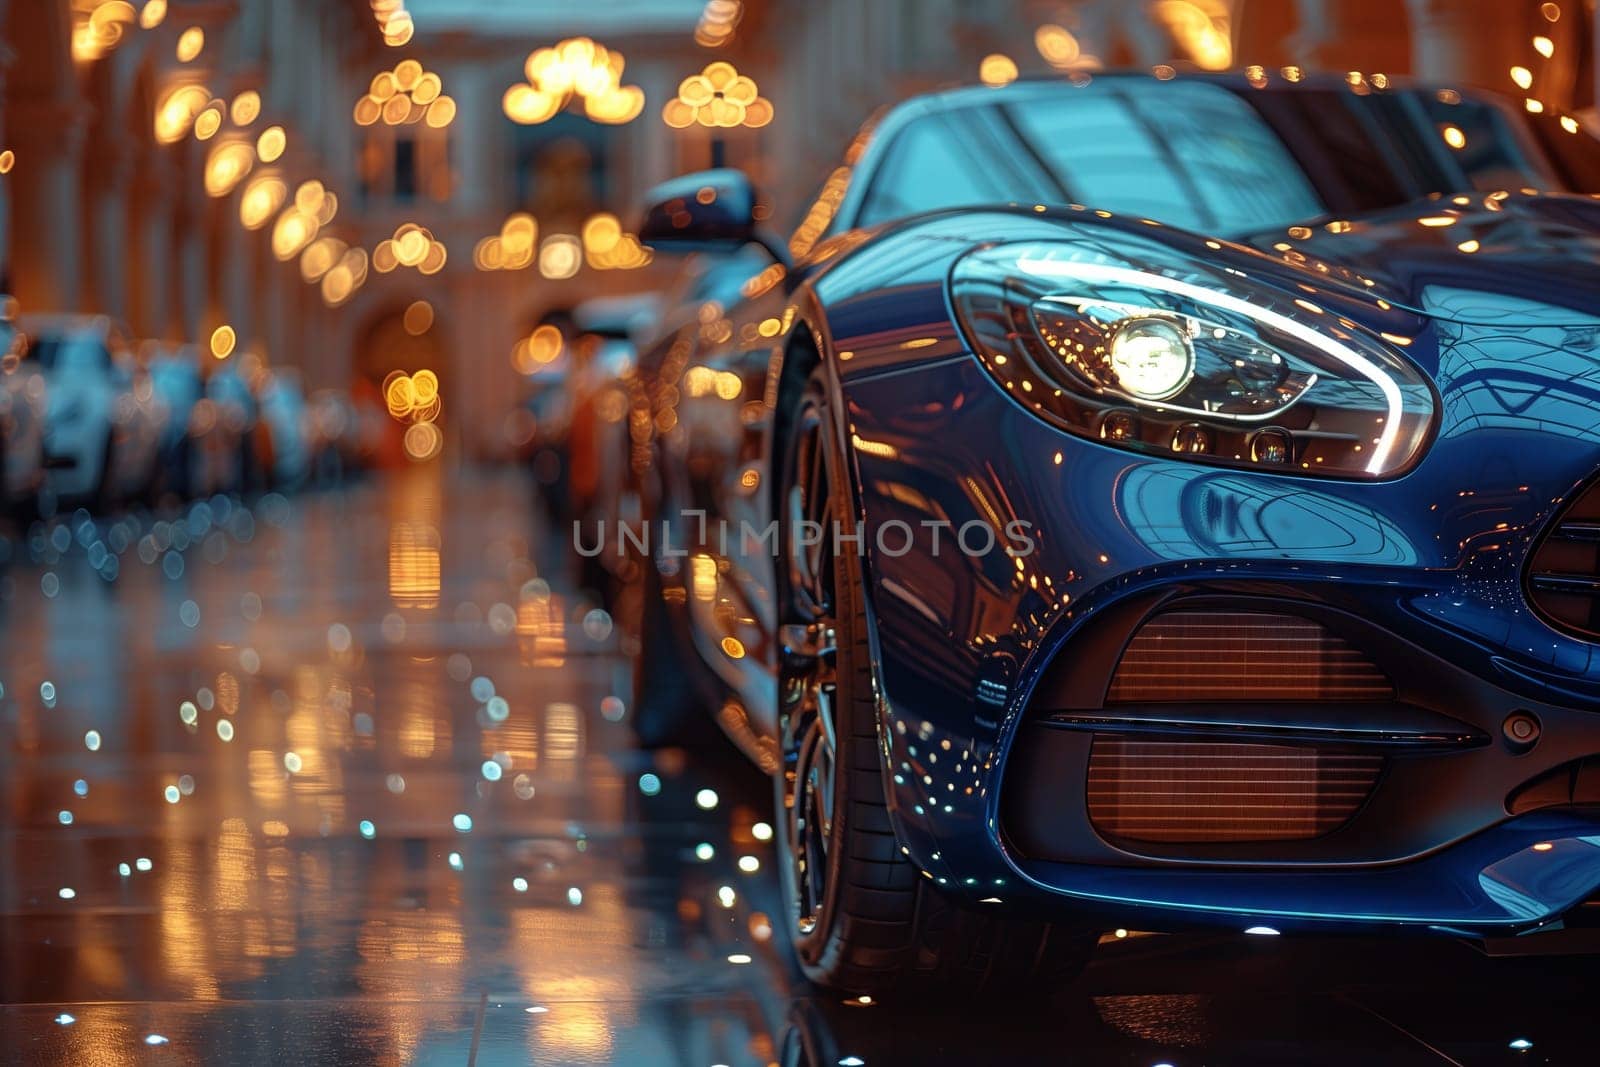 A sleek blue sports car rests on a rainy urban road at night, its parking lights casting a soft glow. The vehicles futuristic design and bright headlamps stand out in the dark cityscape